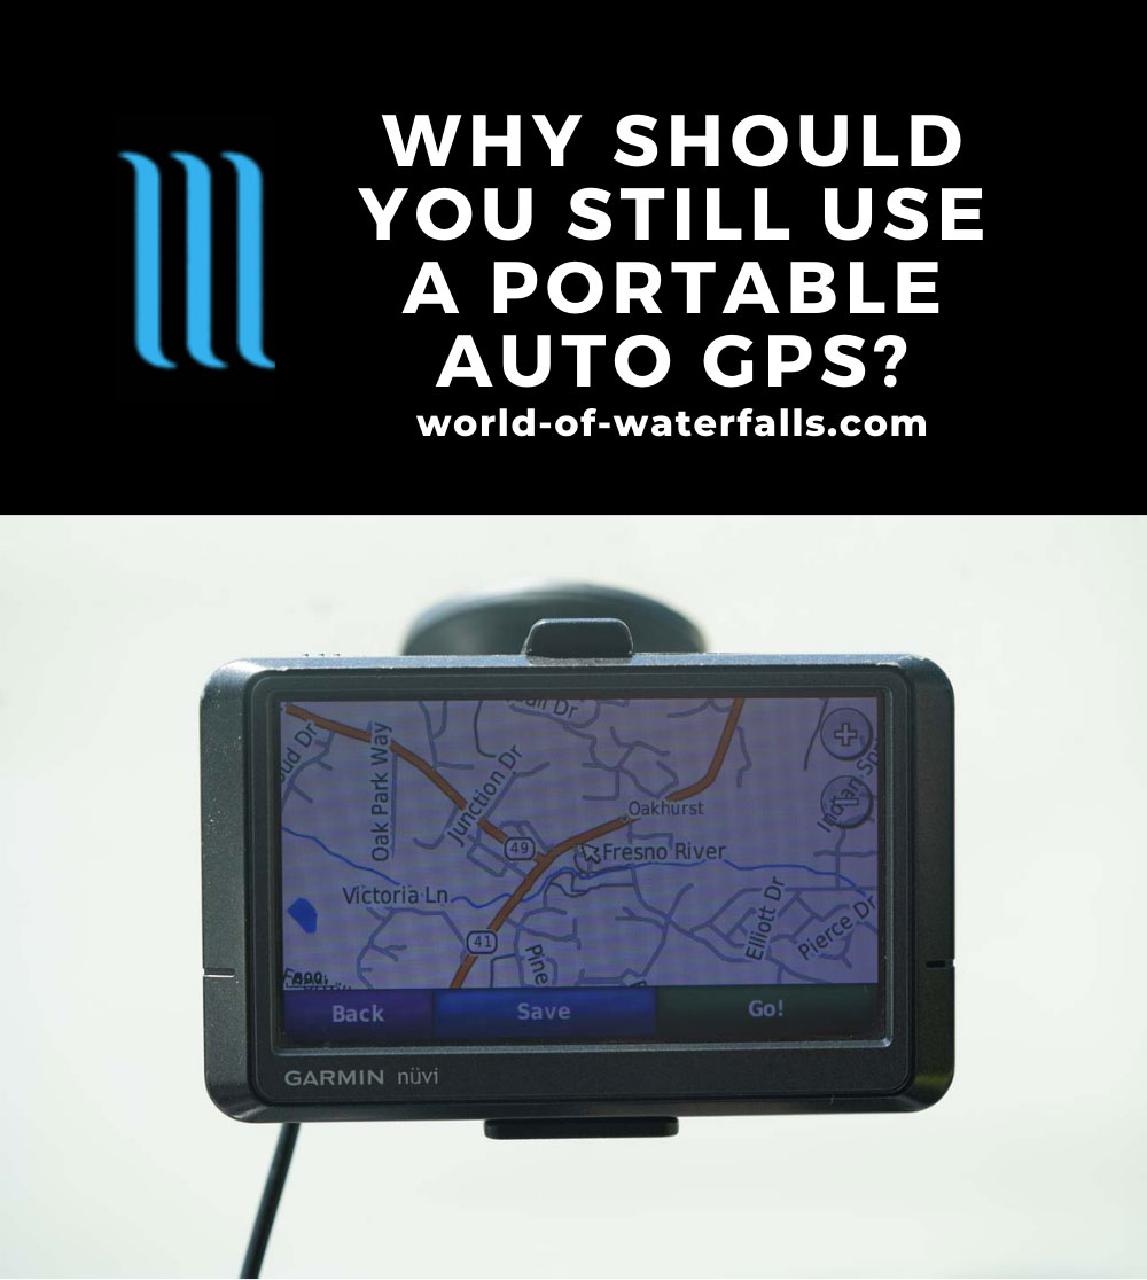 Our trusty GPS Navigation Device or Unit that we still use on our waterfall-related travels